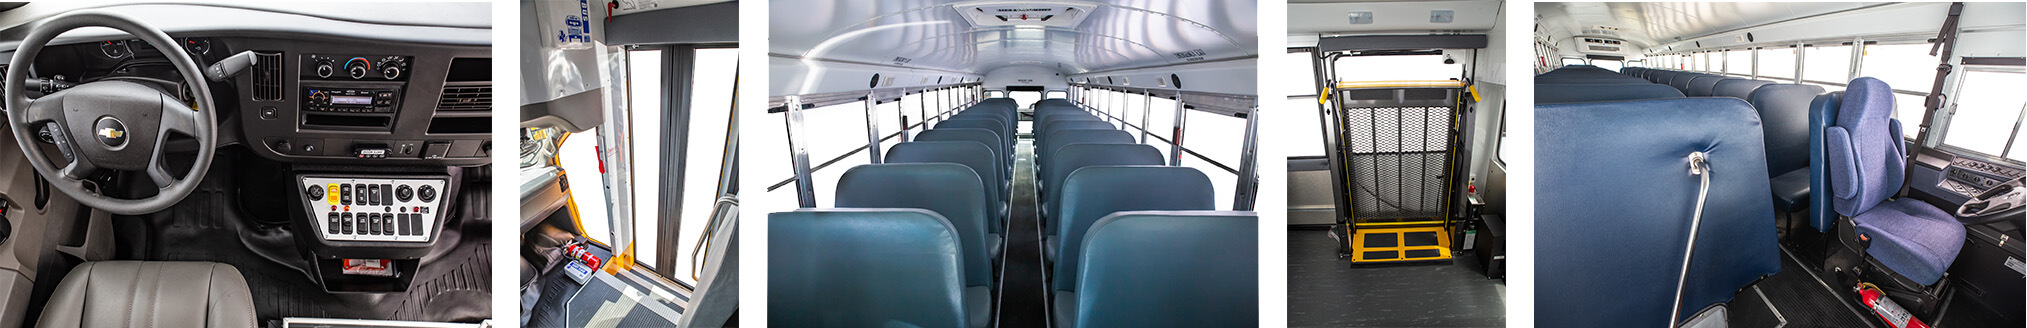 features inside school bus for sale in indiana